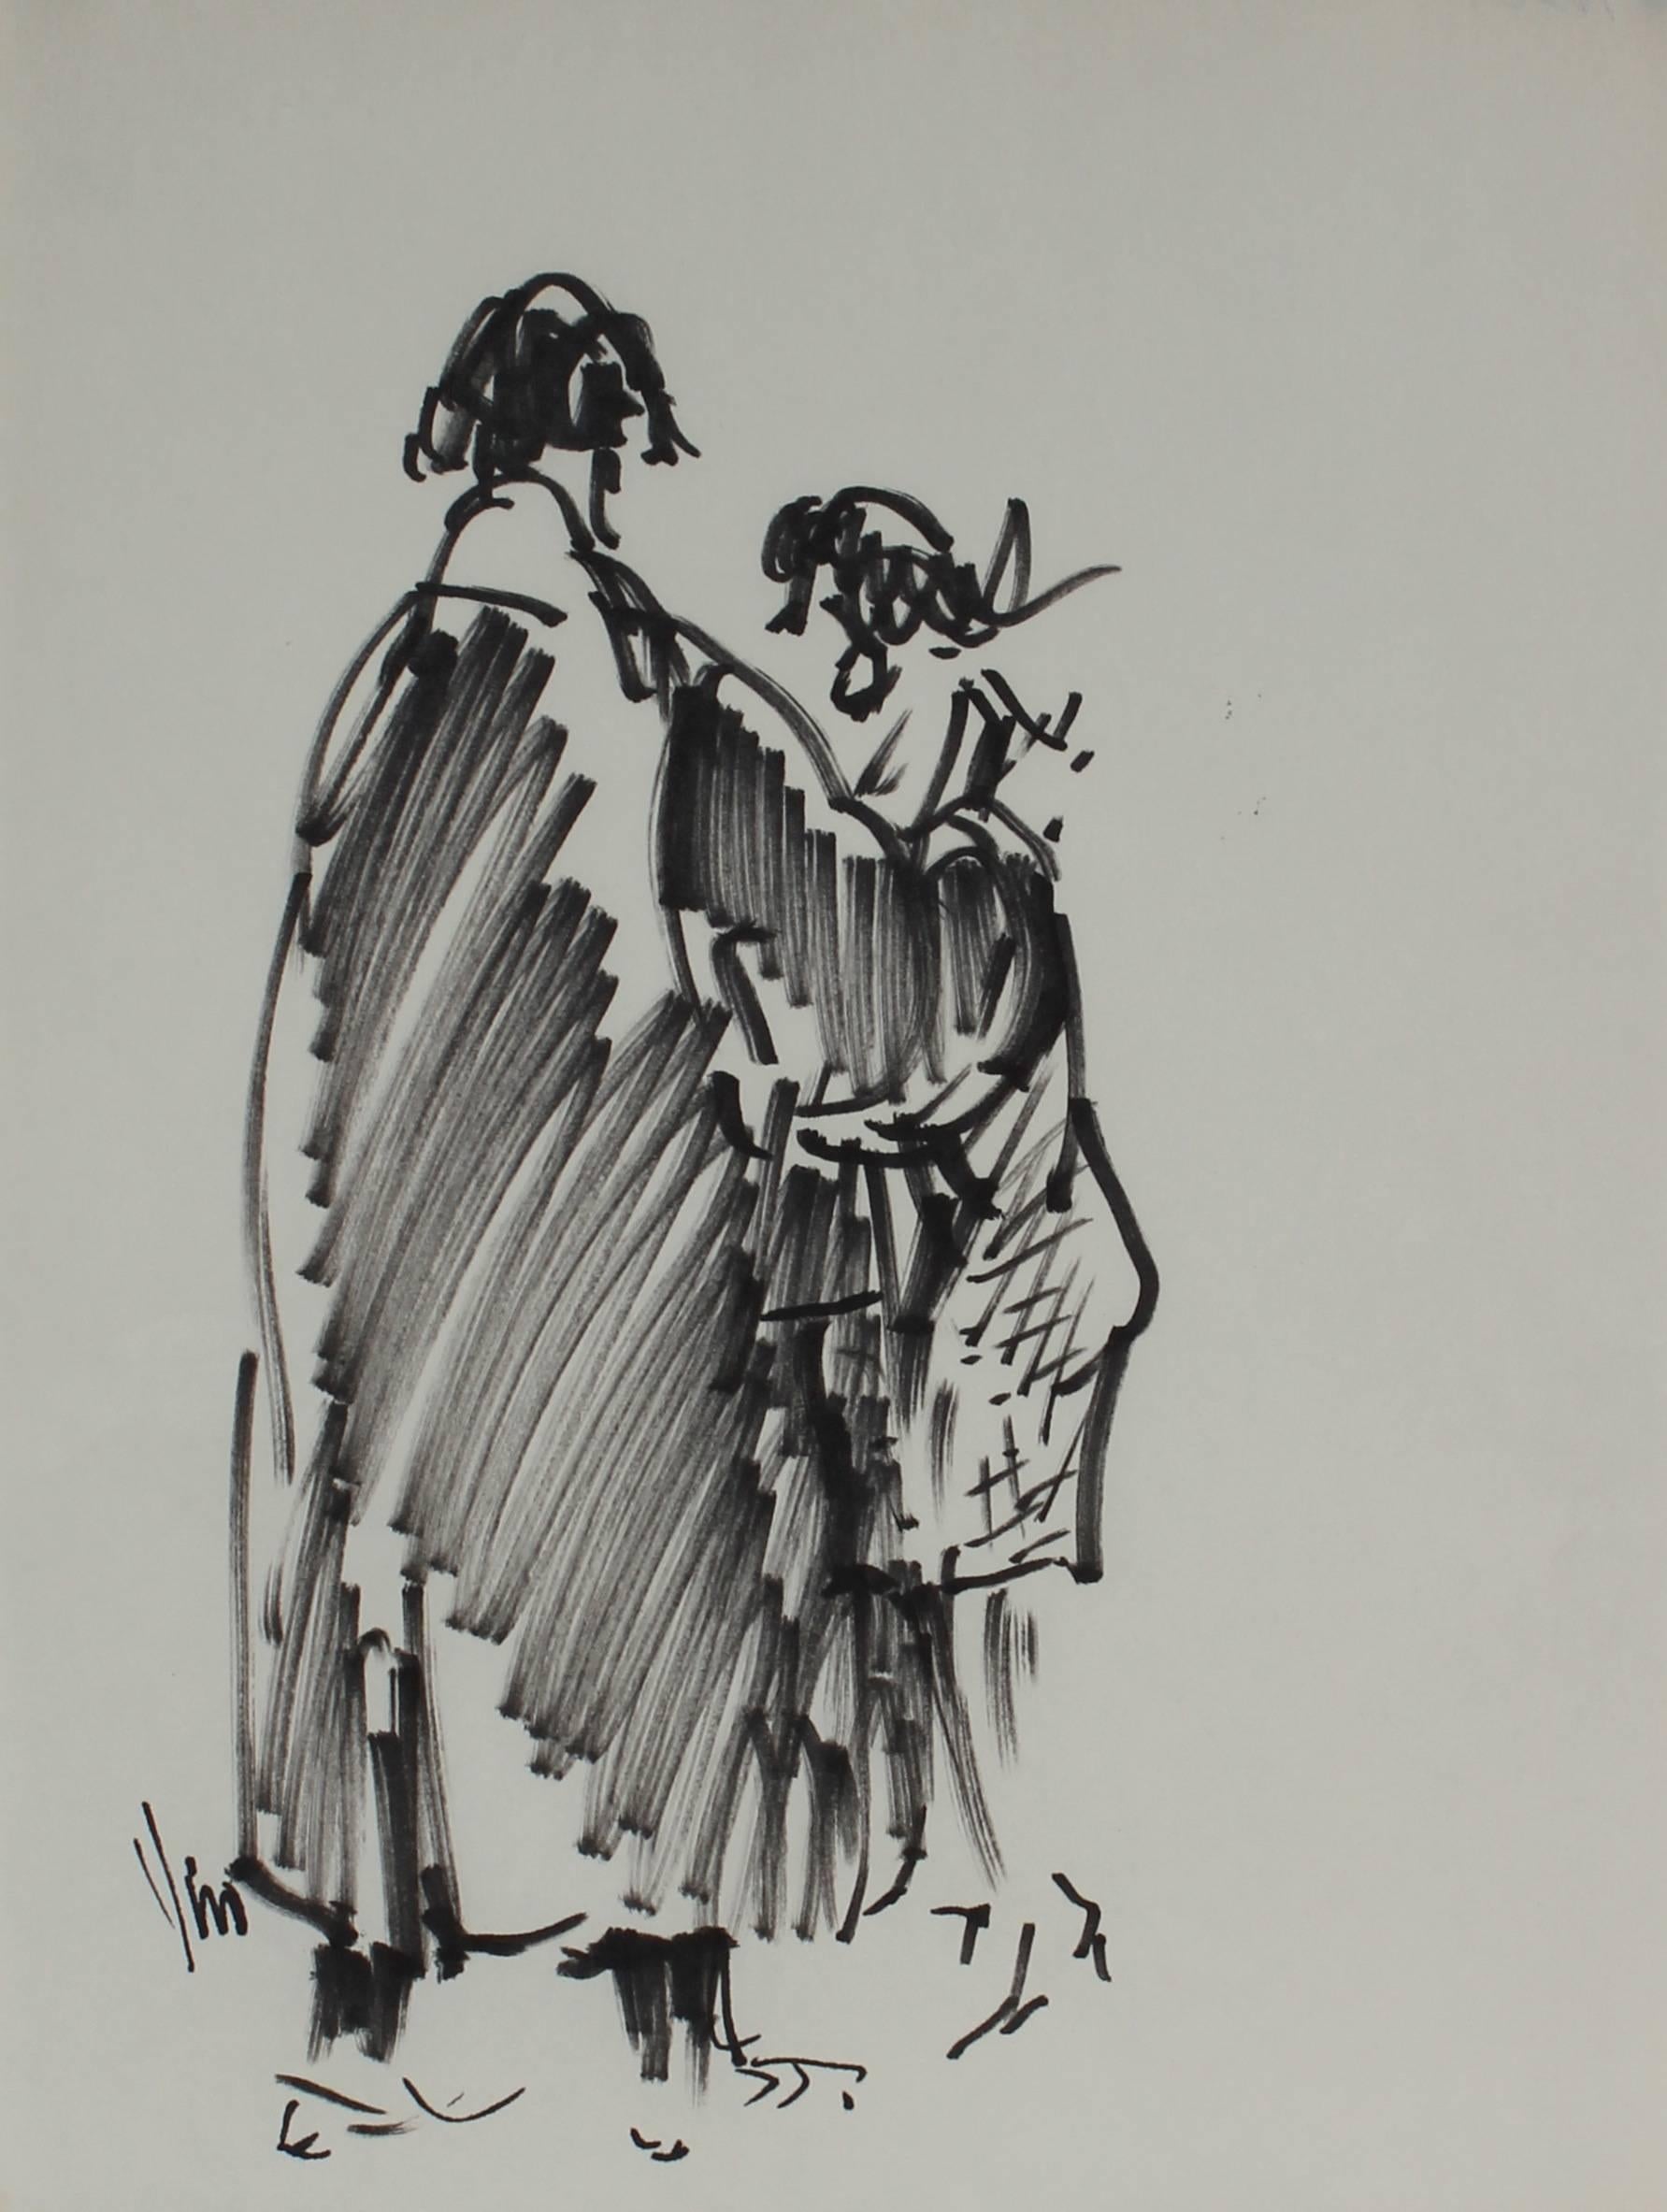 Wiveca Rubinow Figurative Art – Black and White Sketch of Two Figures, Felt Marker on Paper, 1960's